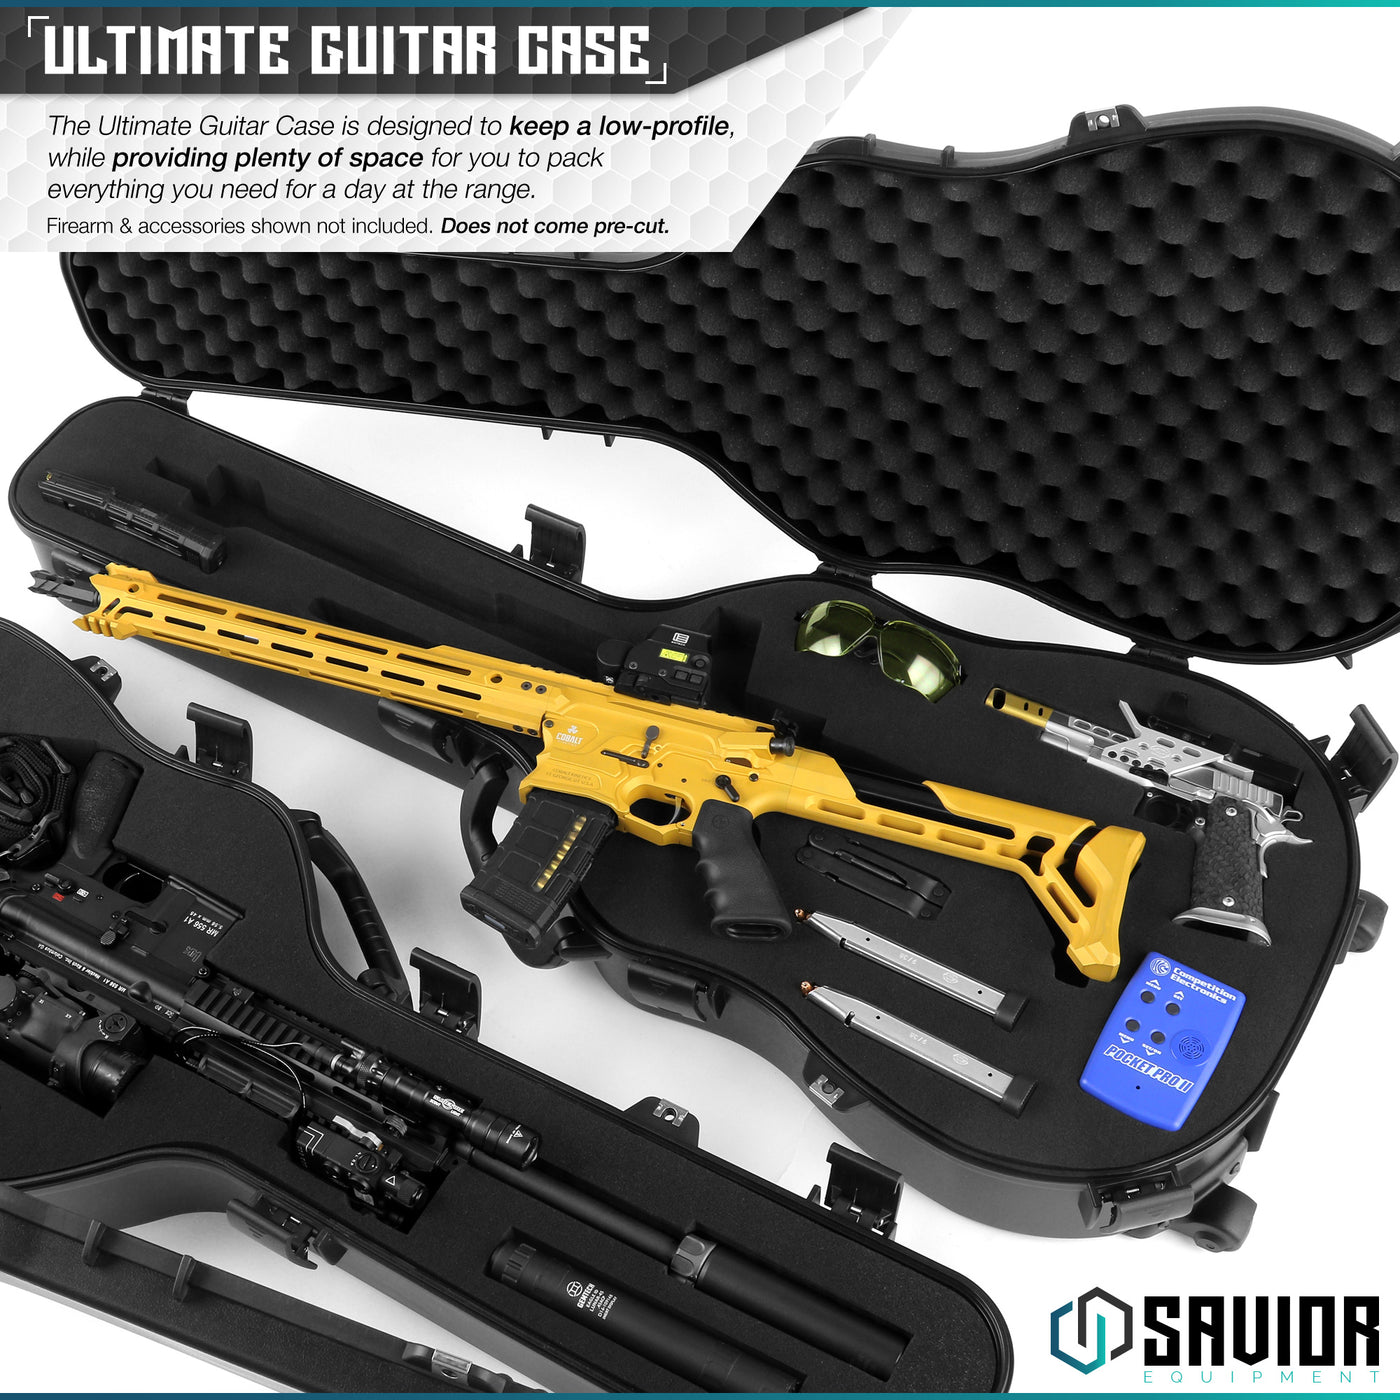 Ultimate Guitar Case - The ultimate guitar case is designed to keep a low-profile, while providing plenty of space for you to pack everything you need for a day at the range. Firearms & accessories shown not included. Does not come pre-cut.